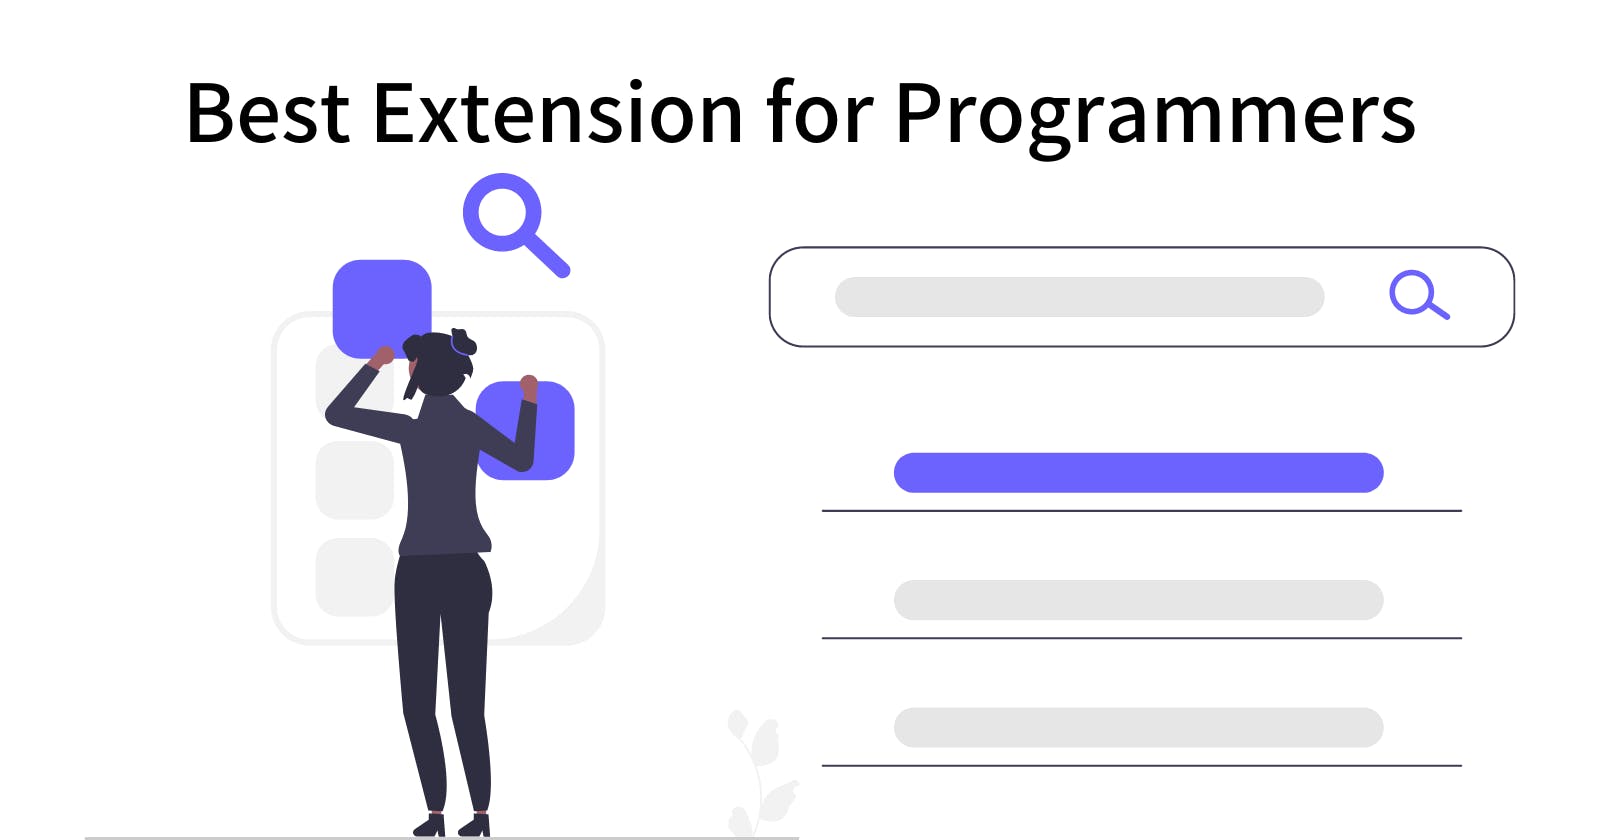 This extension is a programmer's best friend